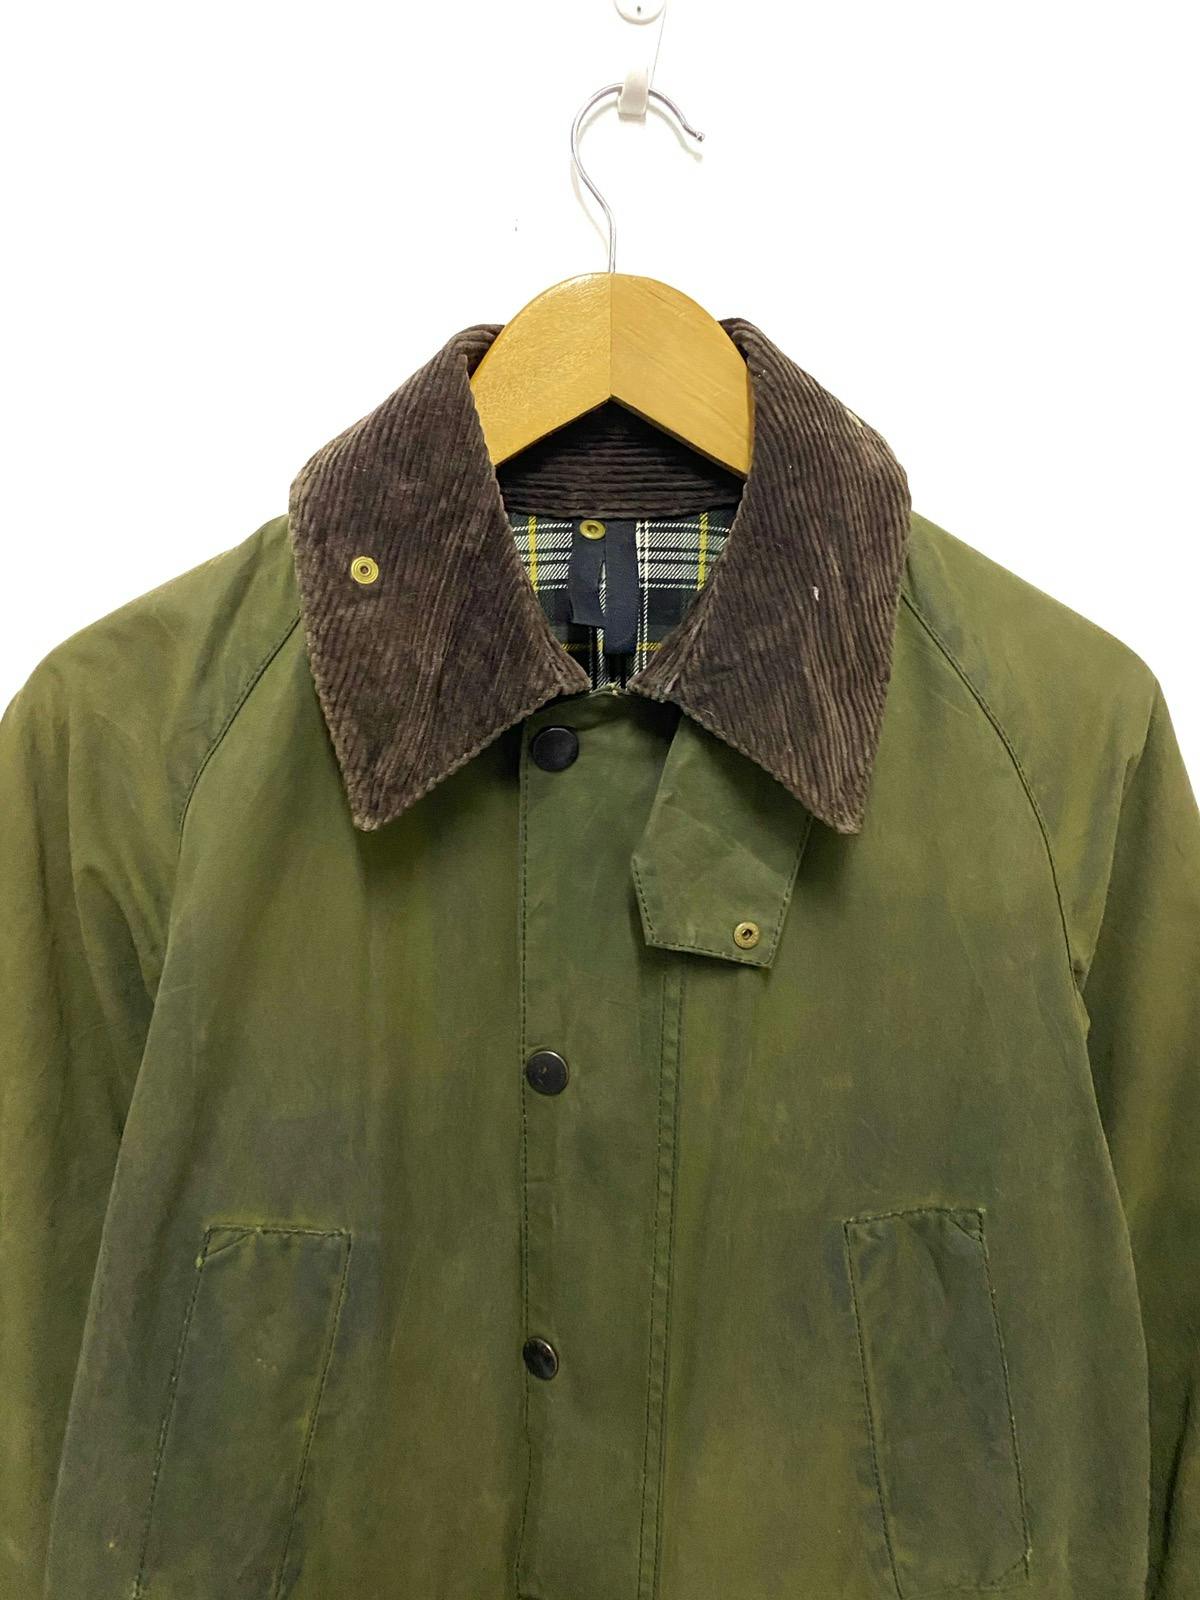 Barbour Bedale A100 Wax Jacket Made in England - 2